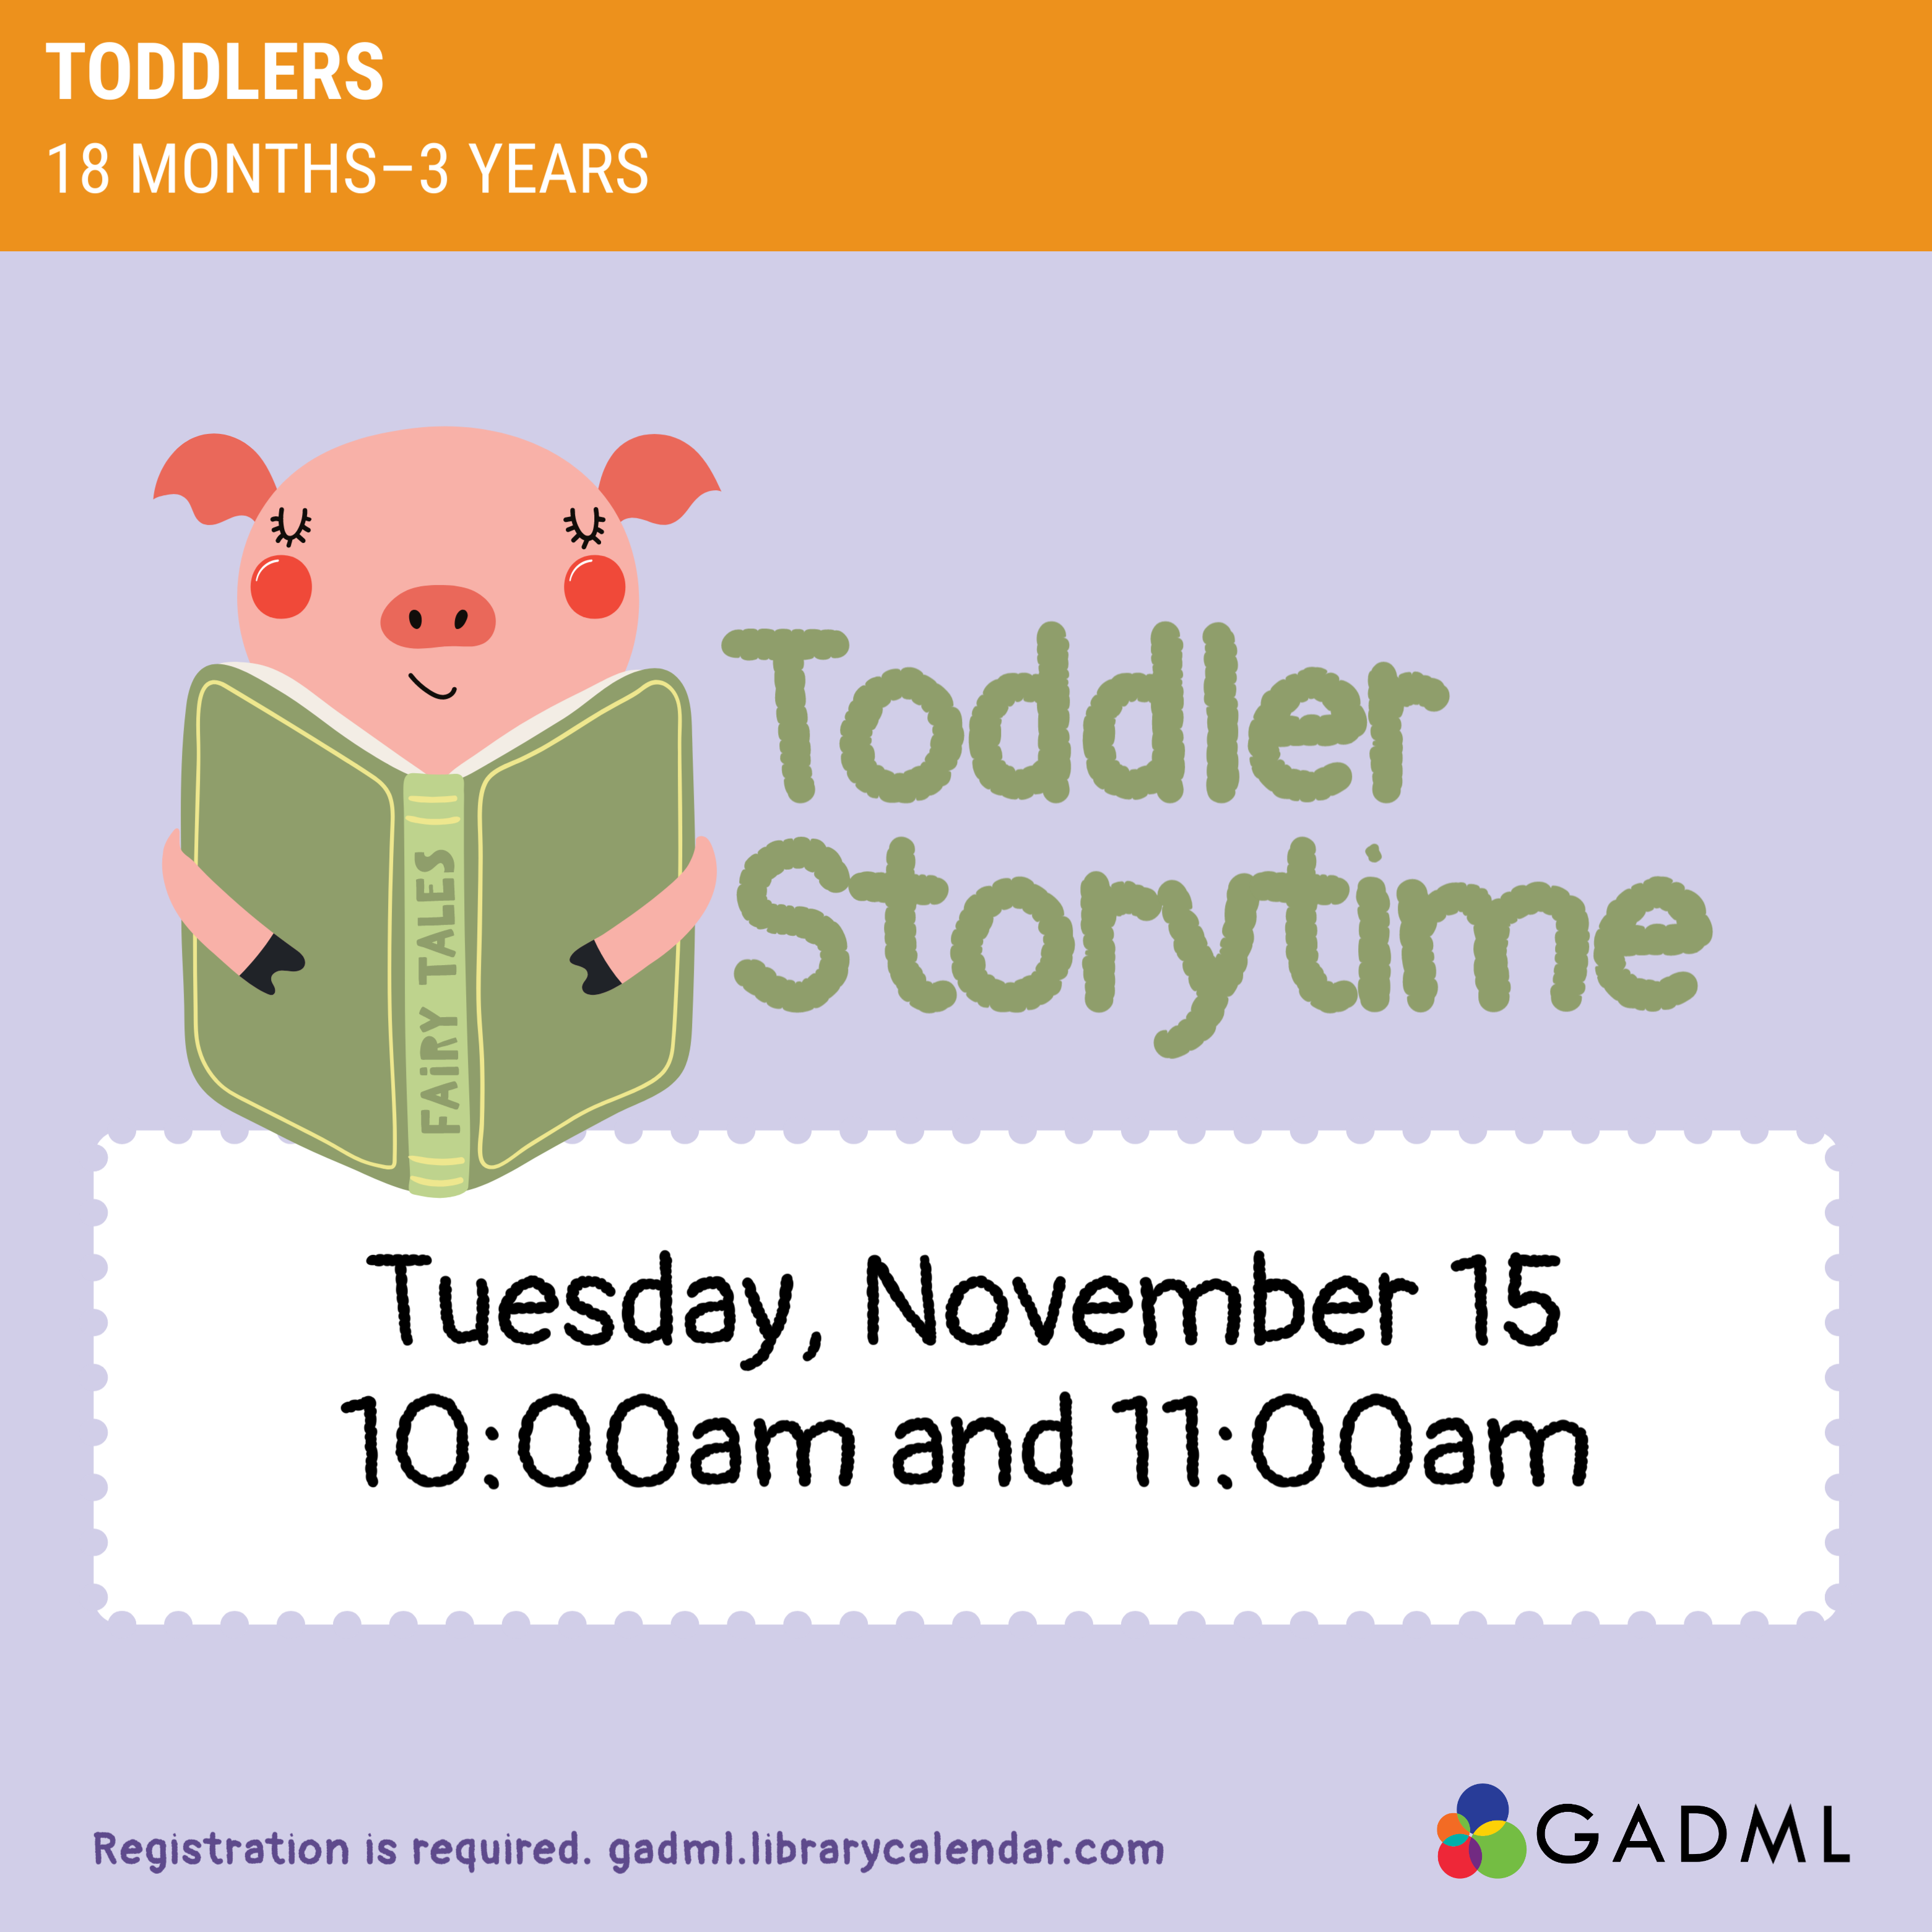 Toddler storytime at 10 and 11am, theme Getting Dressed